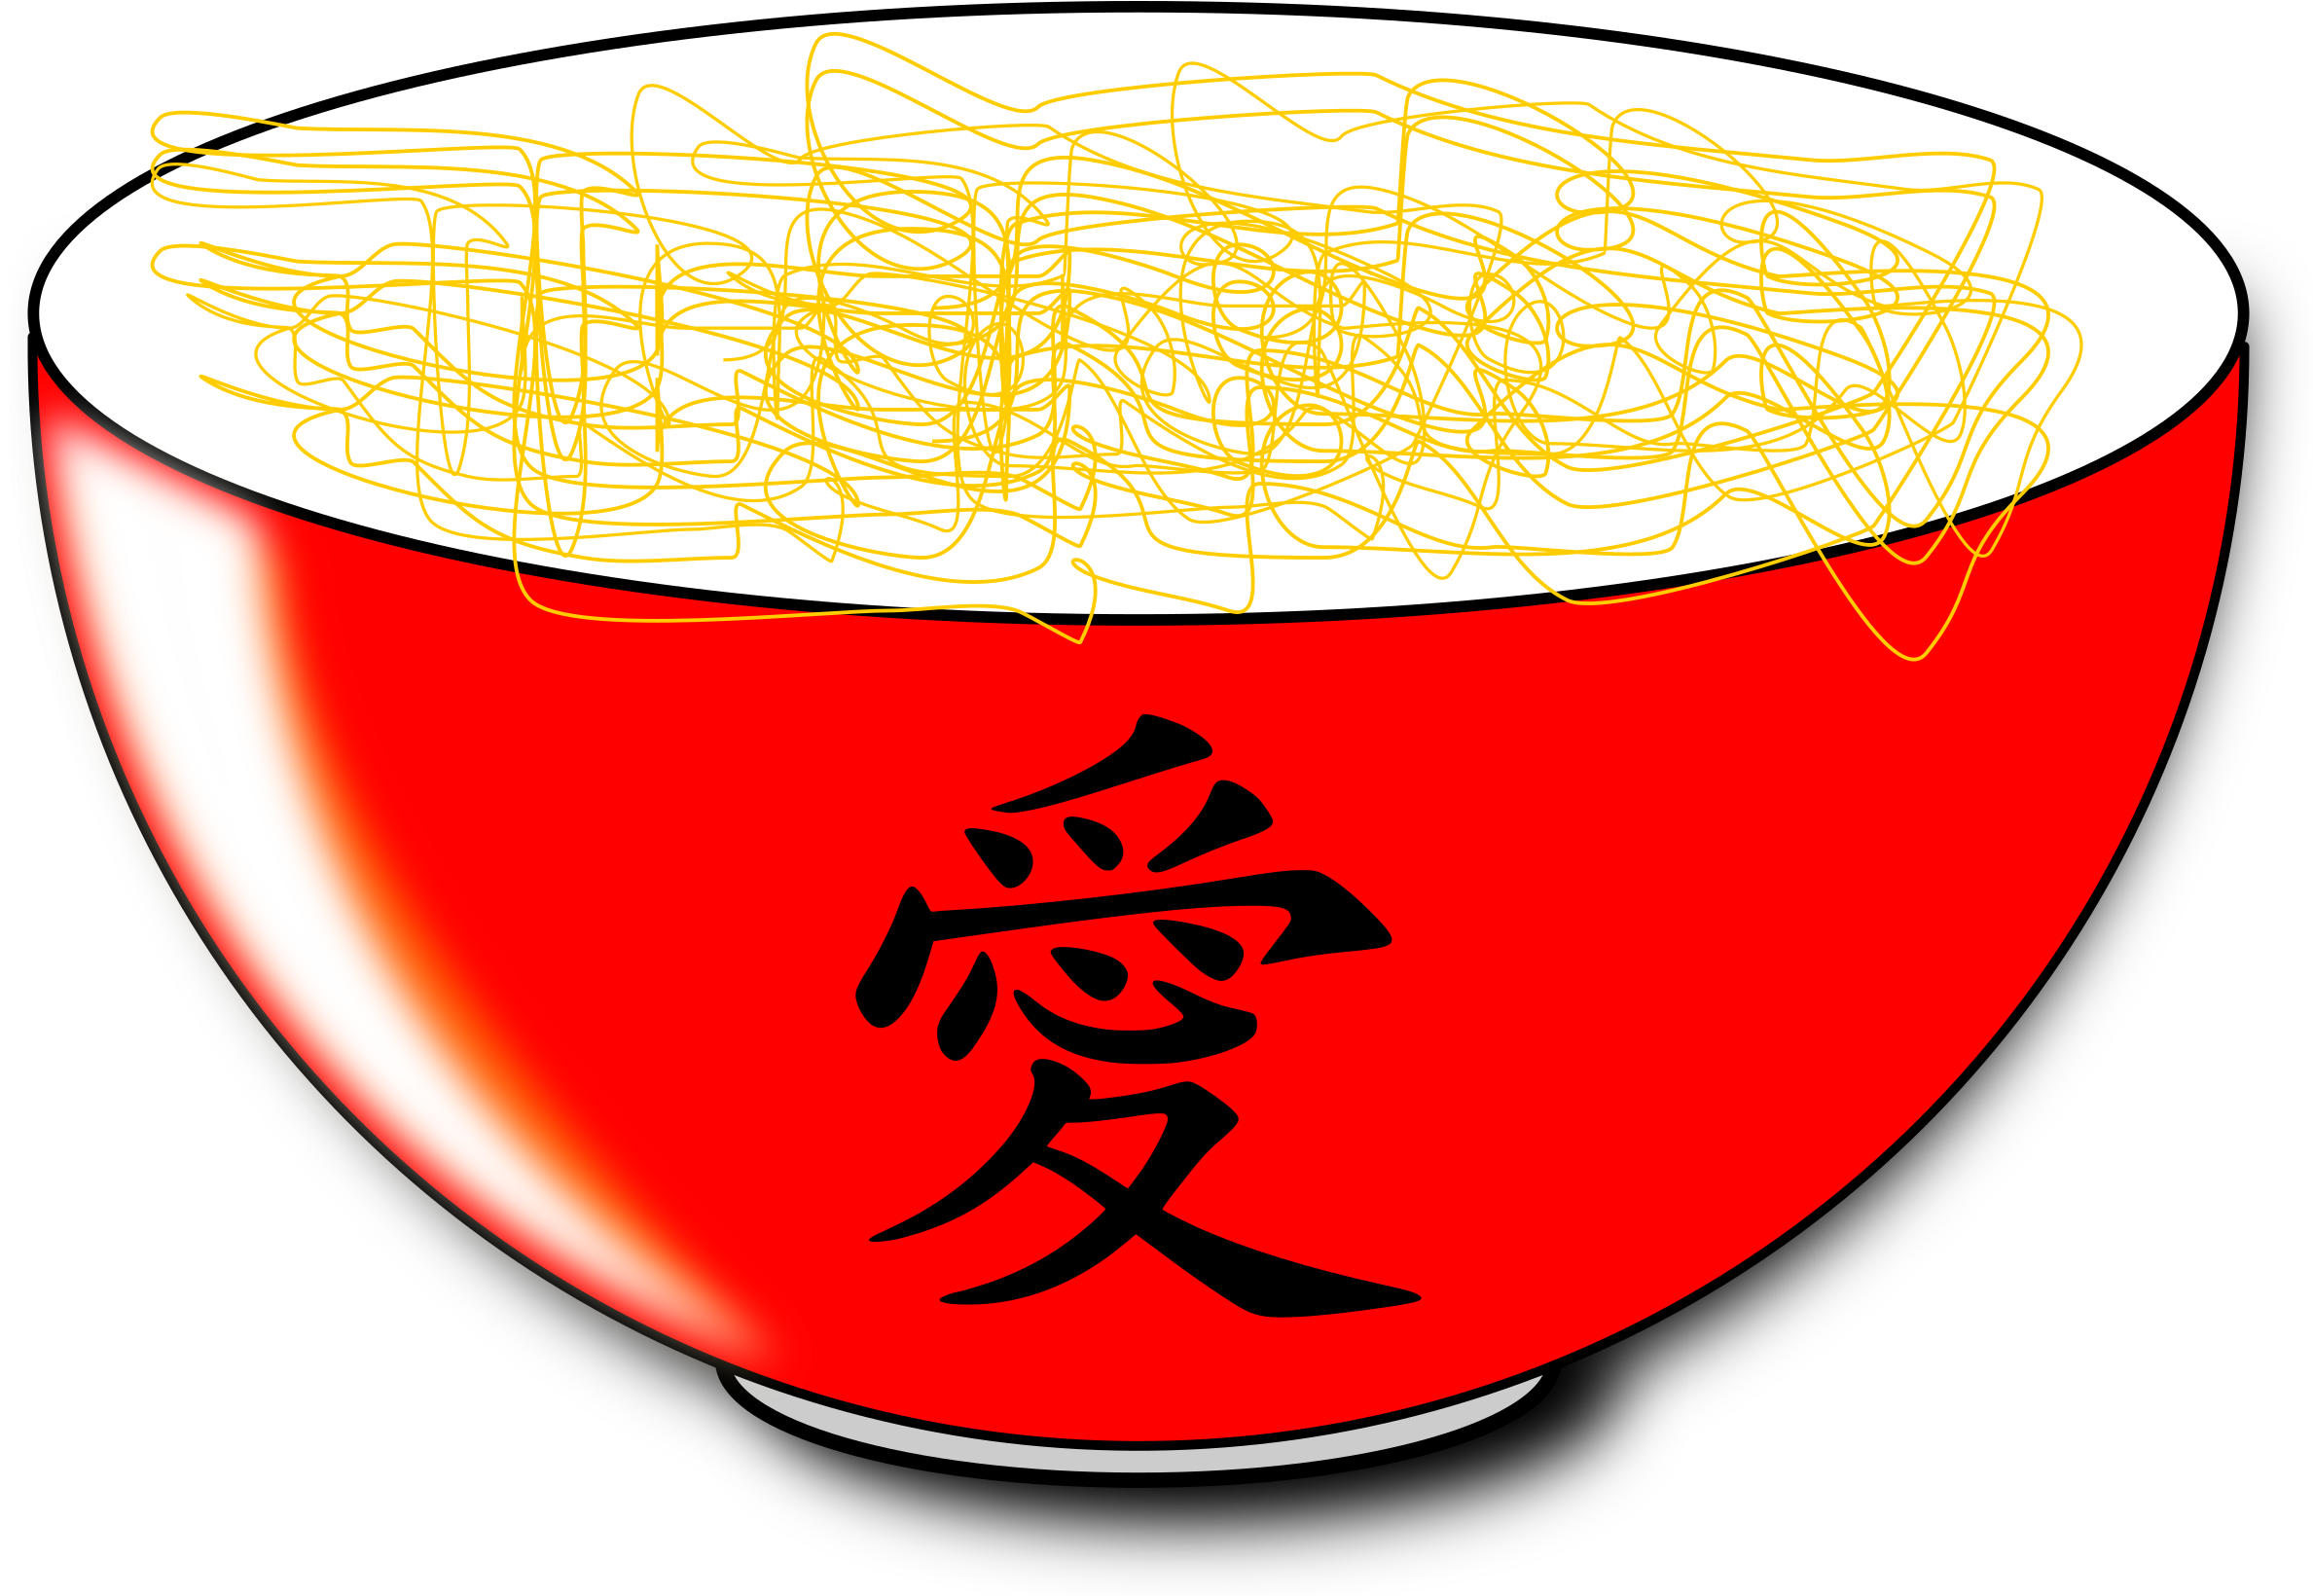 Noodles With Reflet - Chinese Symbol For Love (2400x1639)